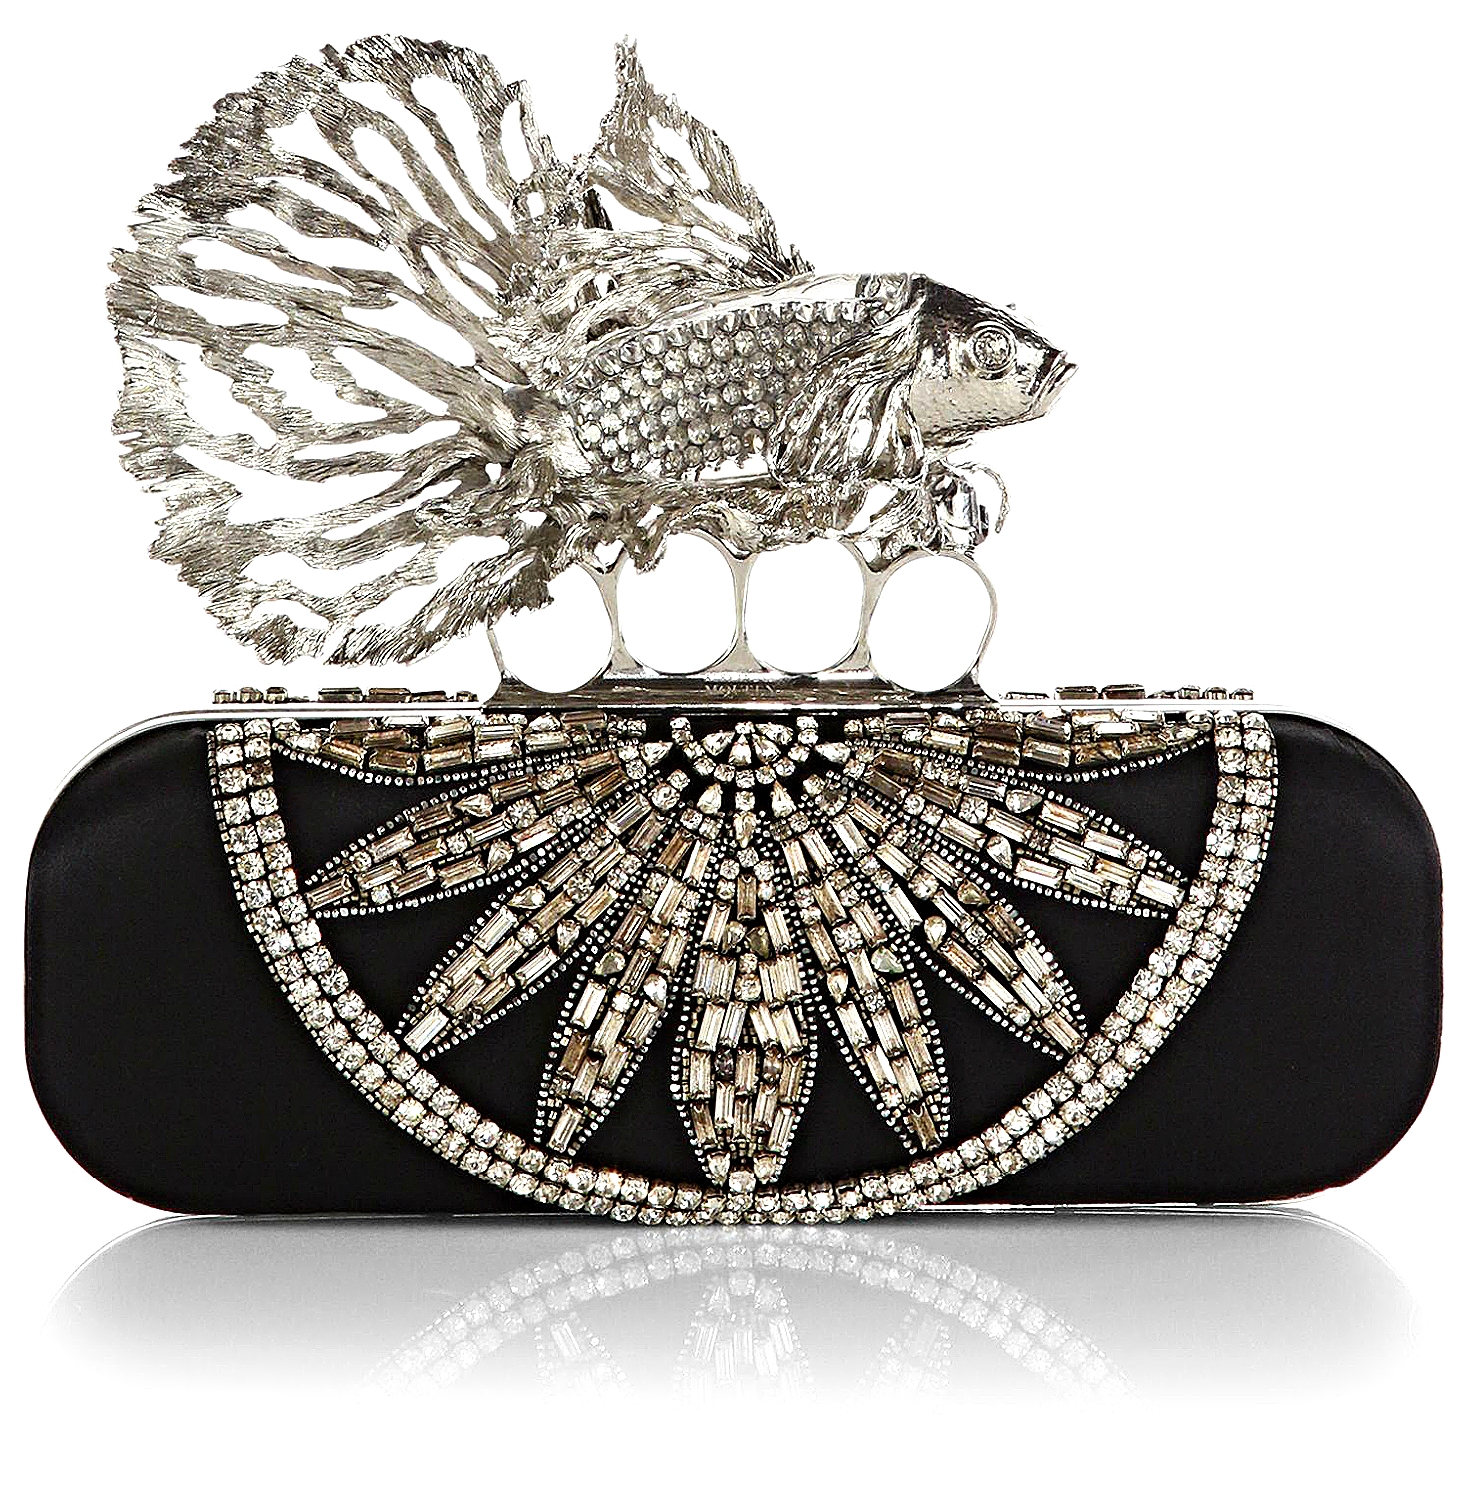 A crow four-ring clutch with gold Art Nouveau sequin embroidery. From the  Alexander McQueen…